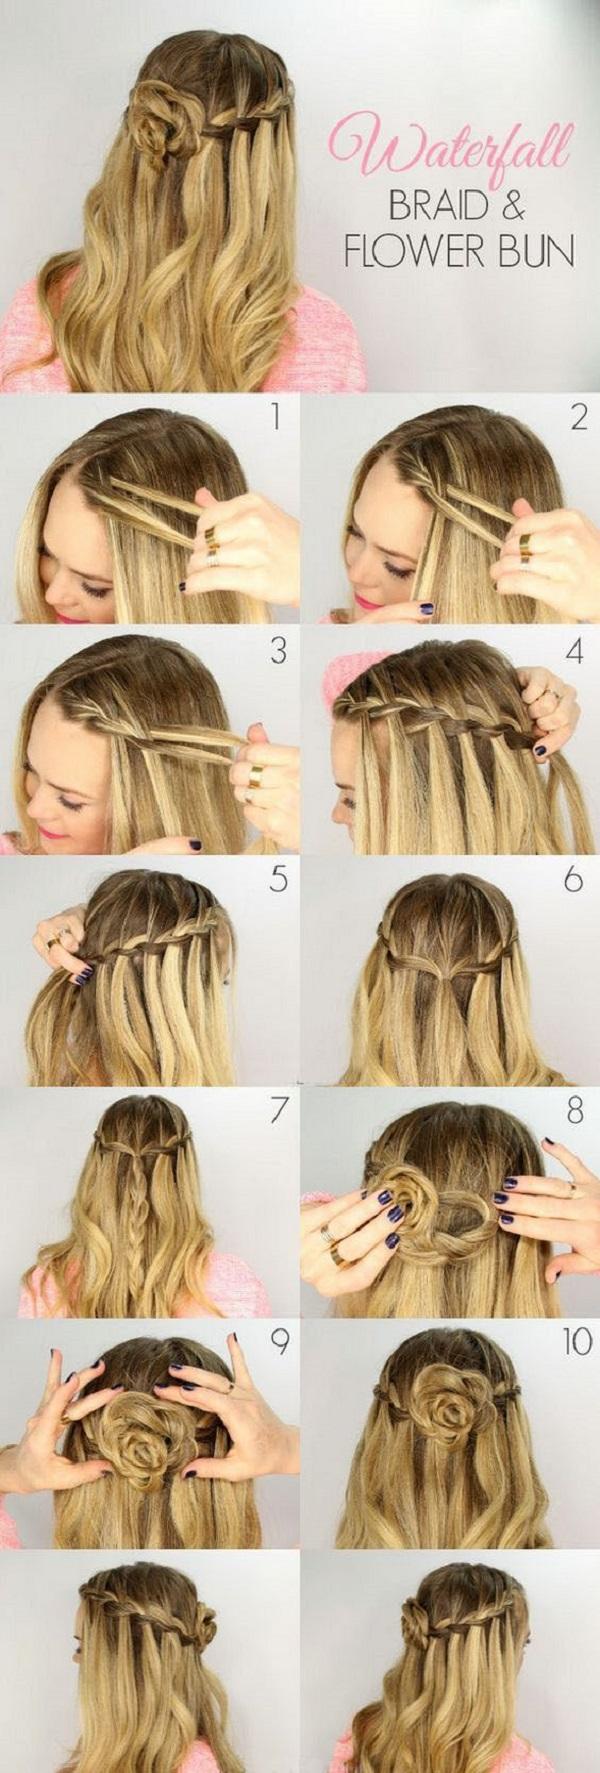 25 Easy Hairstyles For Long Hair Cuded